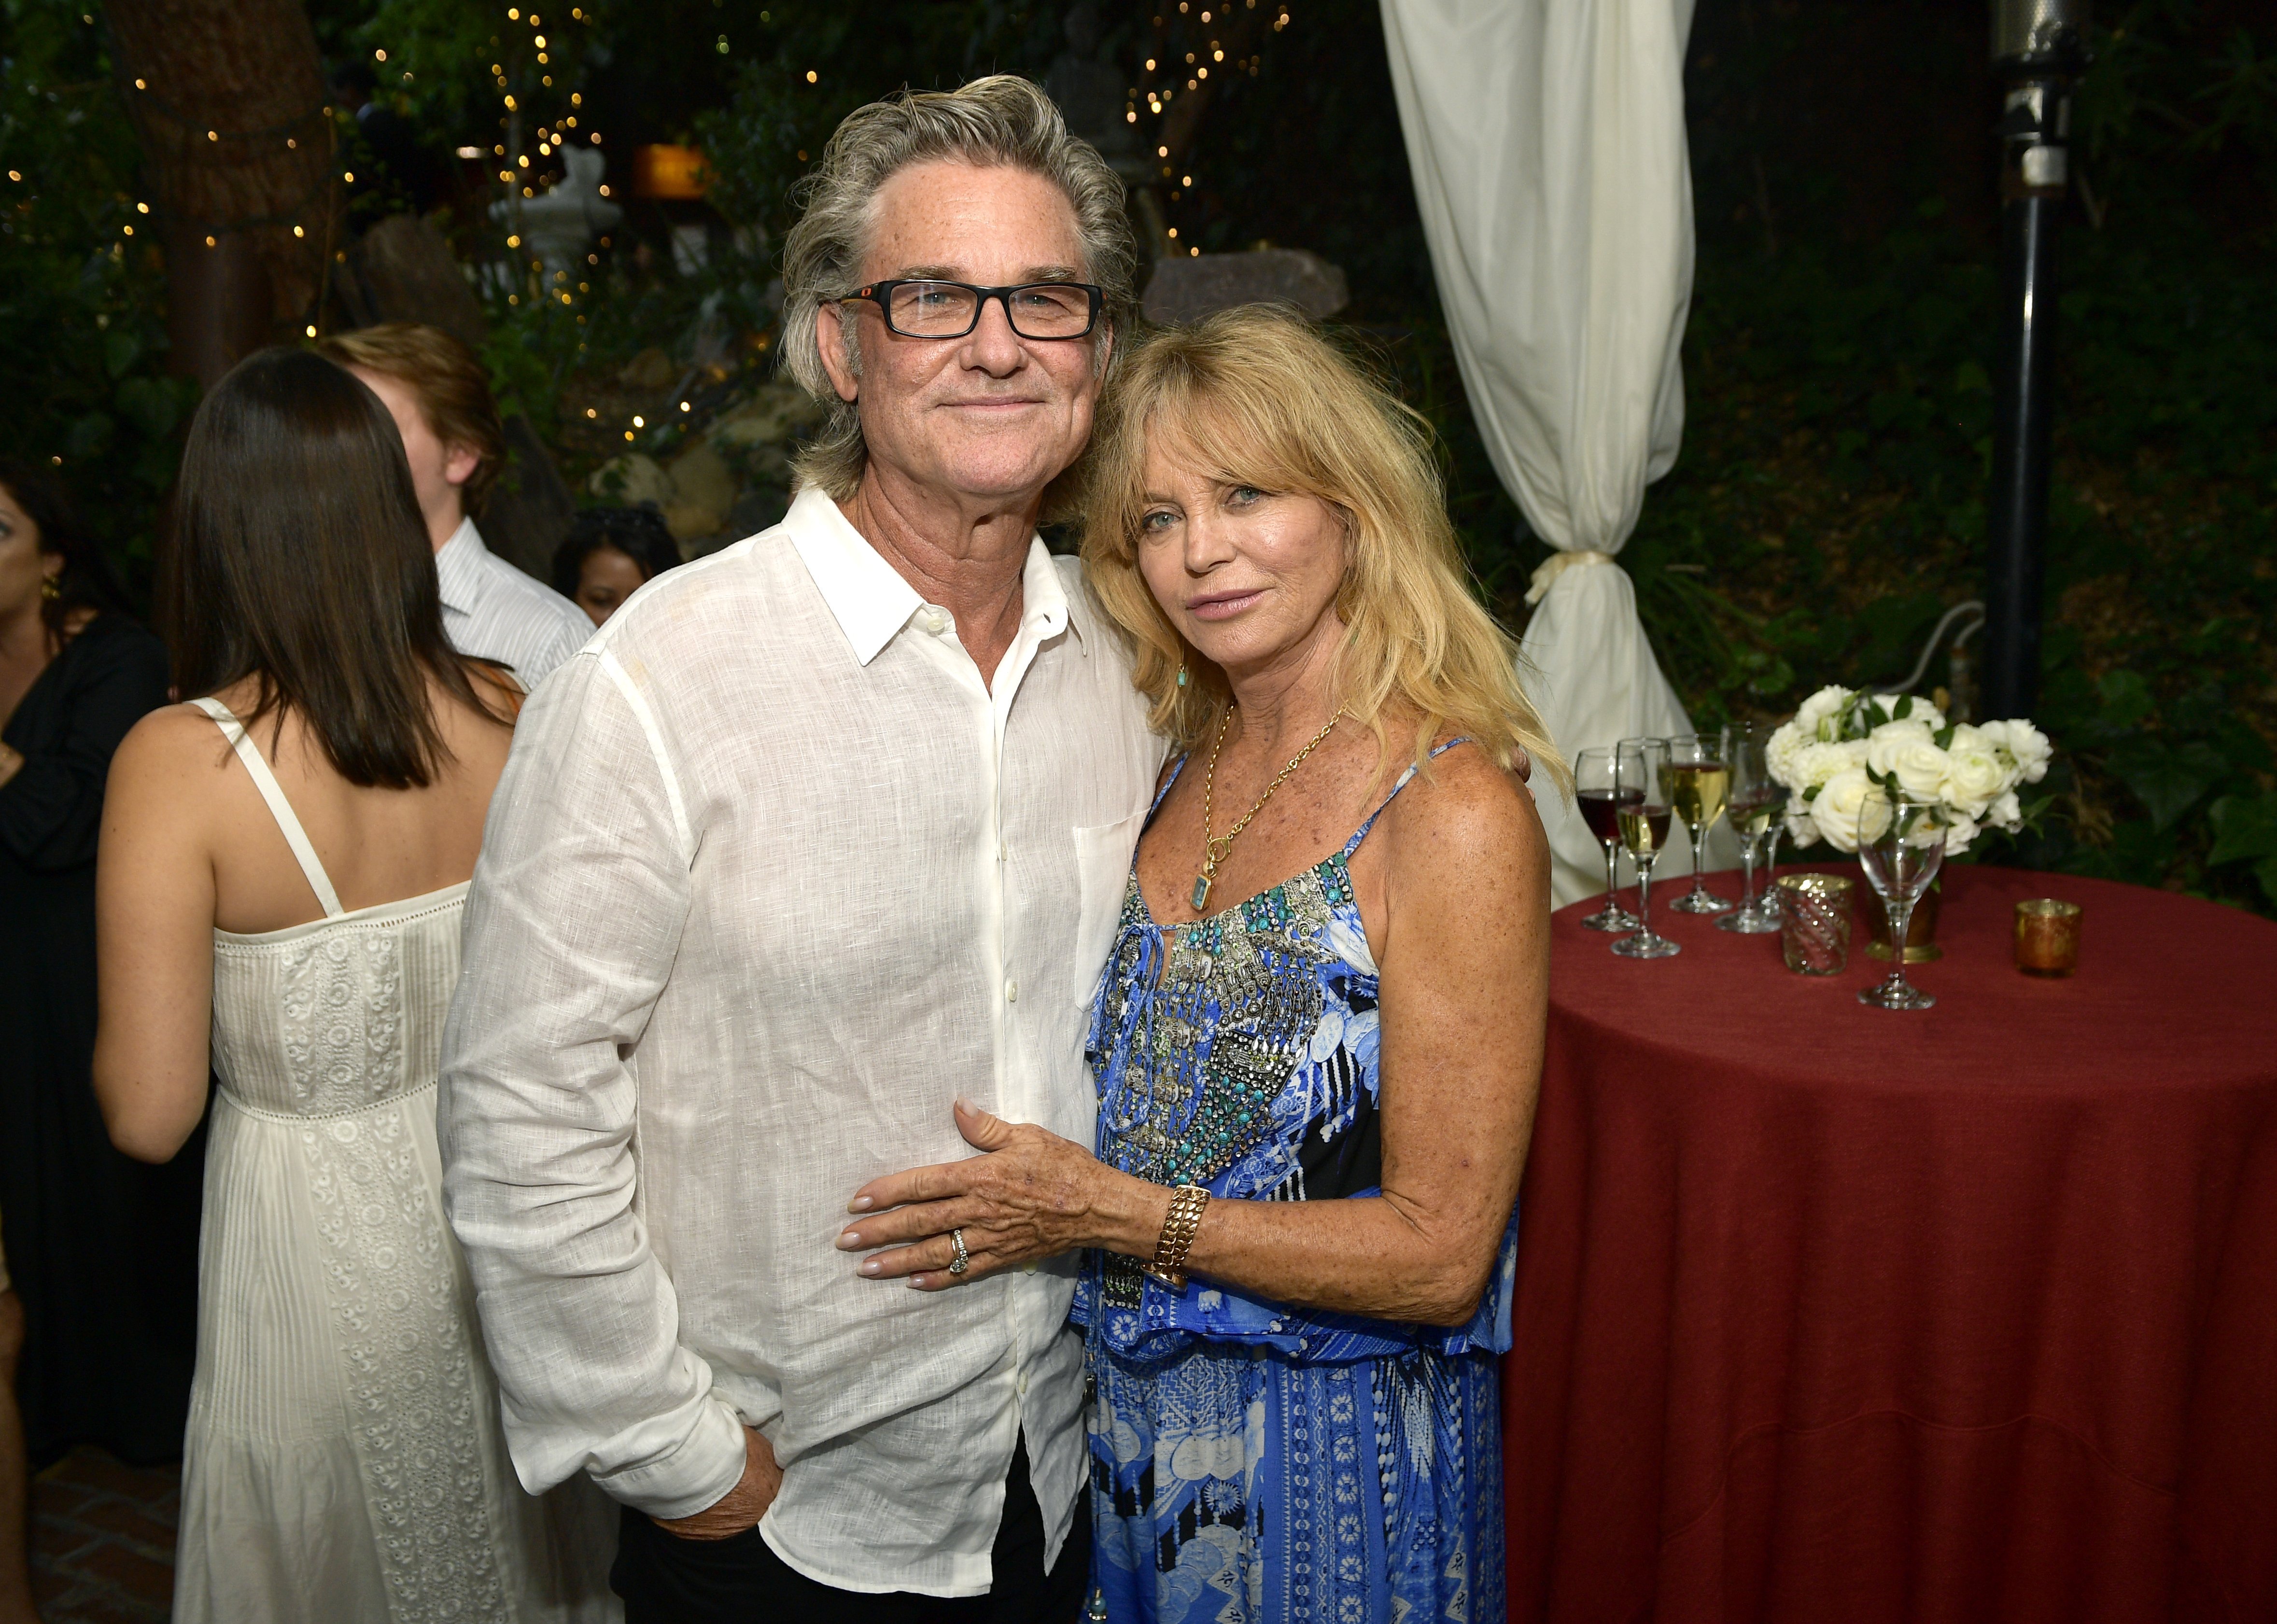 Kurt Russell and Goldie Hawn attend the "Wild Wild Country" Filmmaker Toast in Topanga, California on August 4, 2018 | Photo: Getty Images